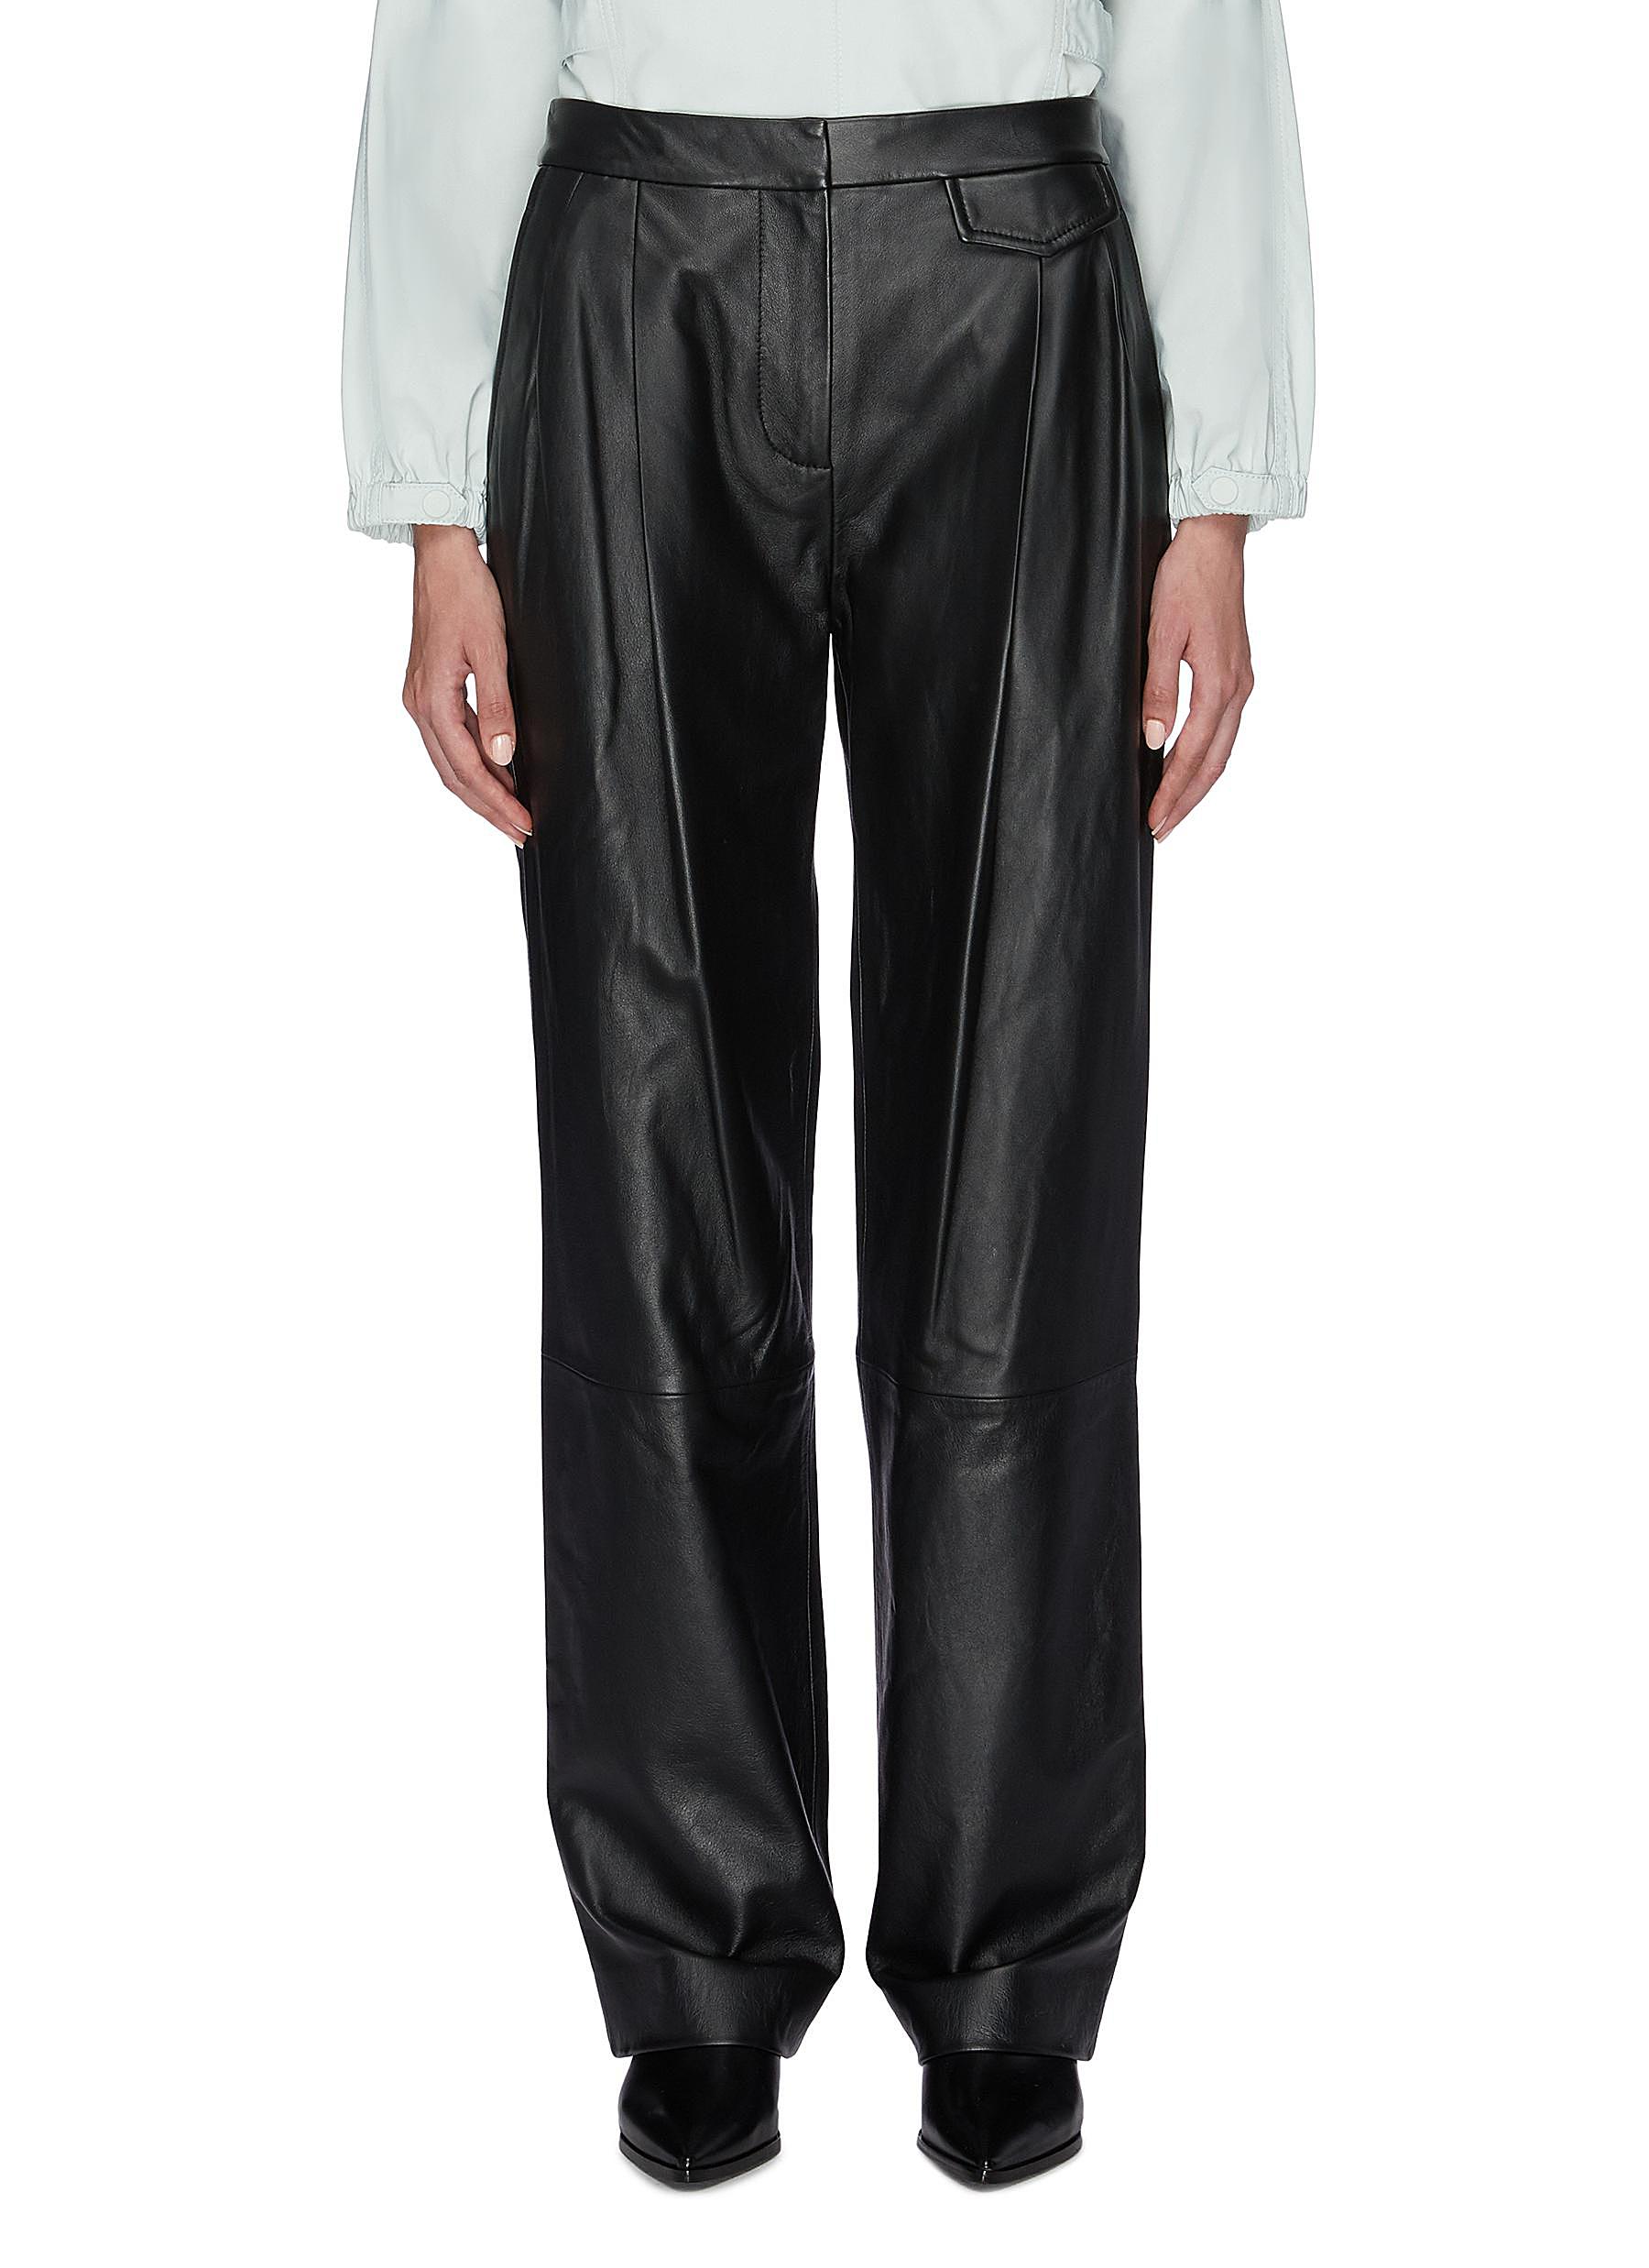 Pleated leather wide leg pants by 3.1 Phillip Lim